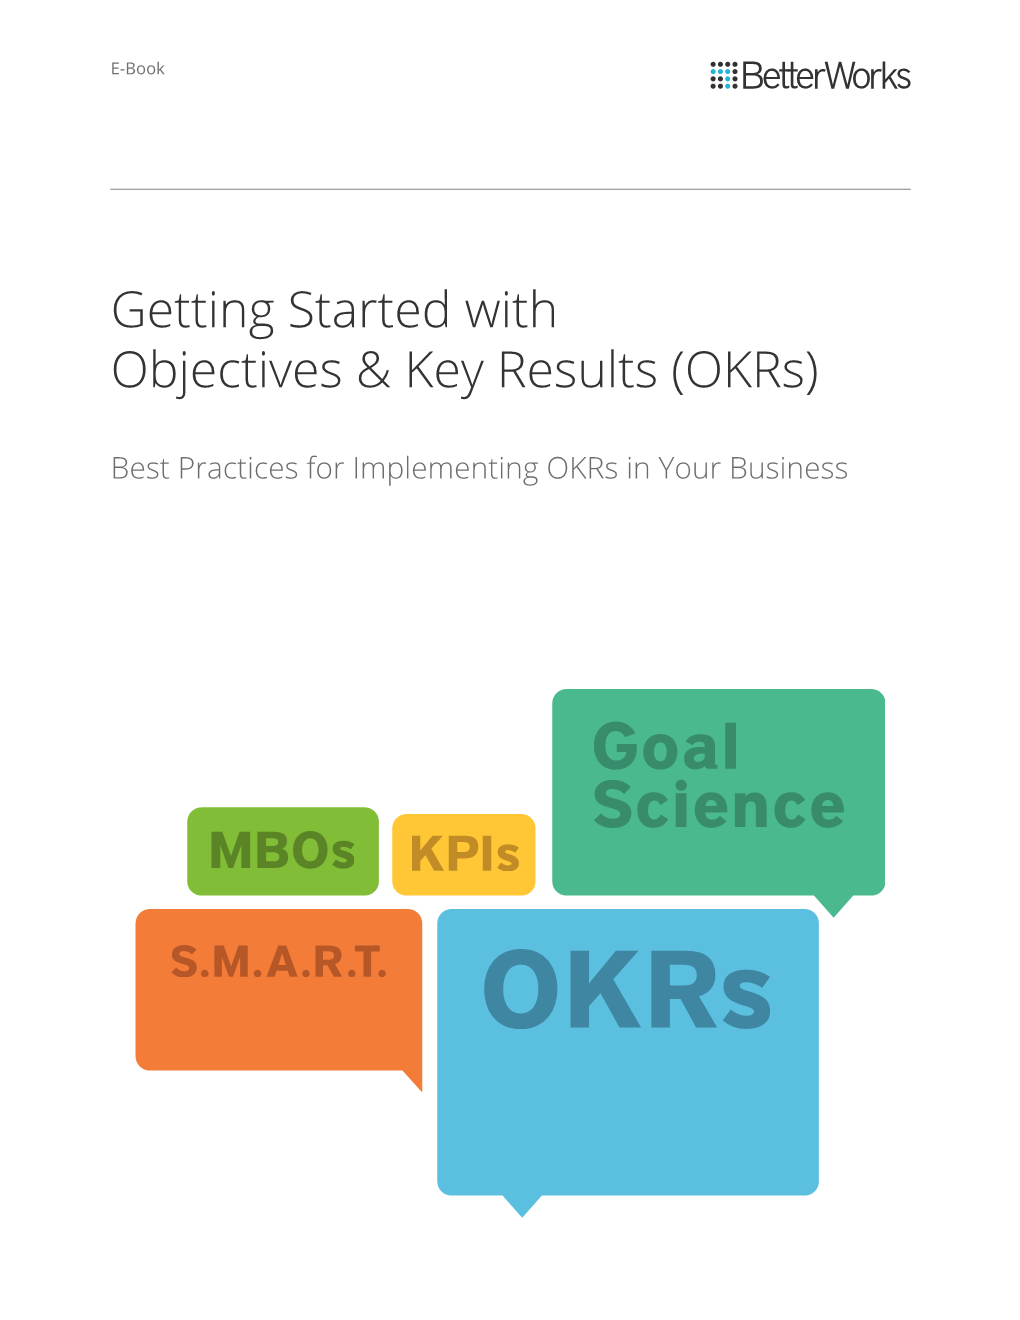 Getting Started with Objectives & Key Results (Okrs)